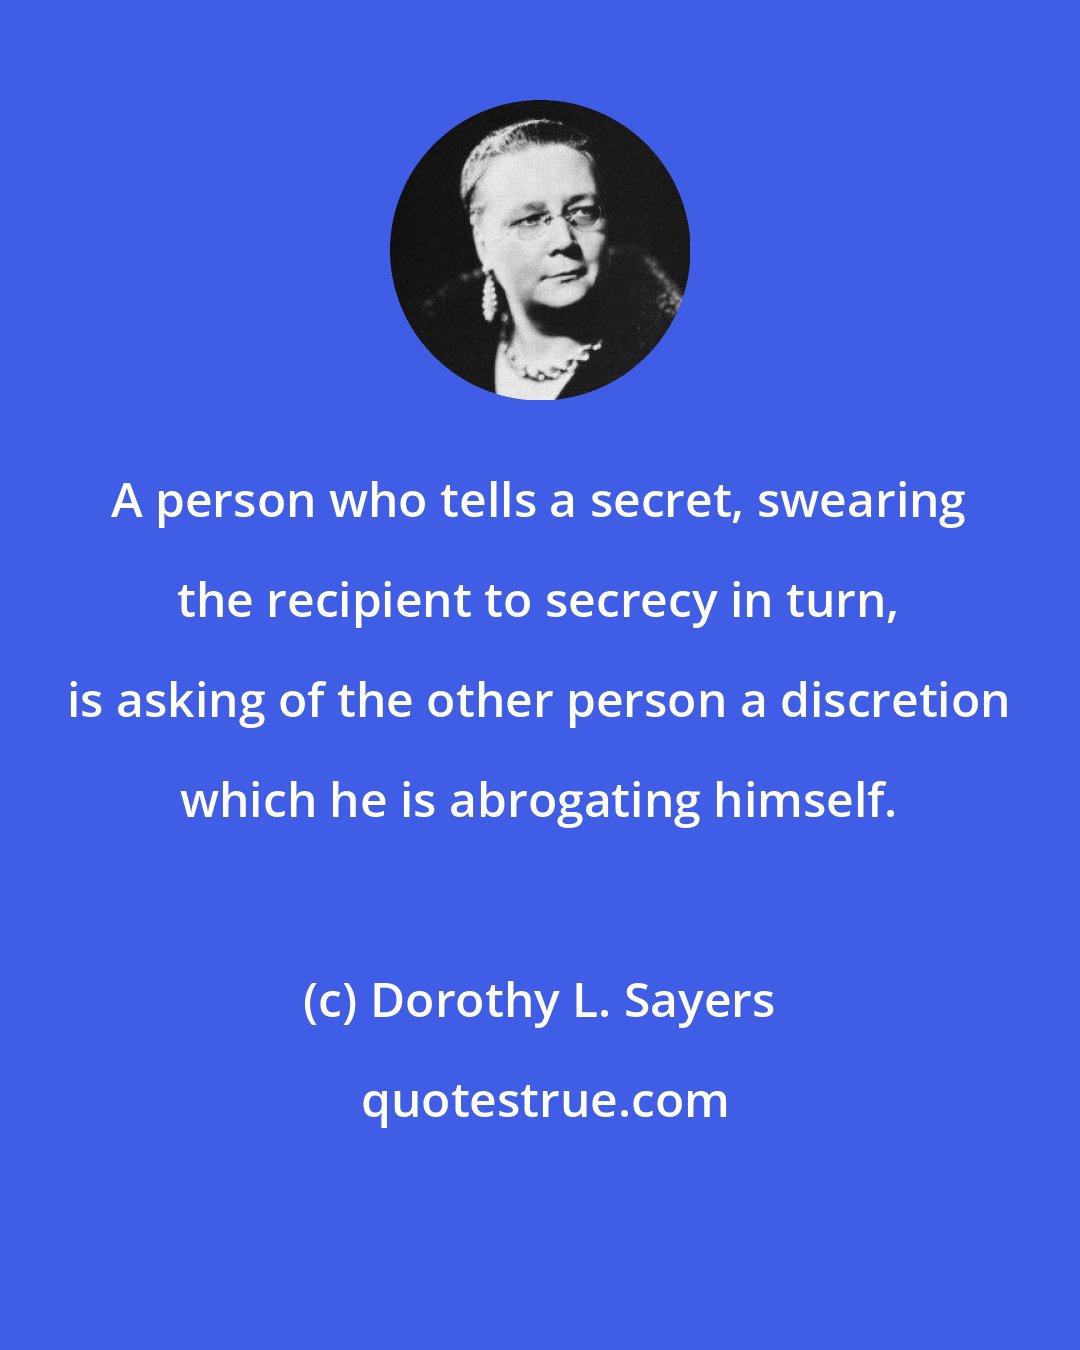 Dorothy L. Sayers: A person who tells a secret, swearing the recipient to secrecy in turn, is asking of the other person a discretion which he is abrogating himself.